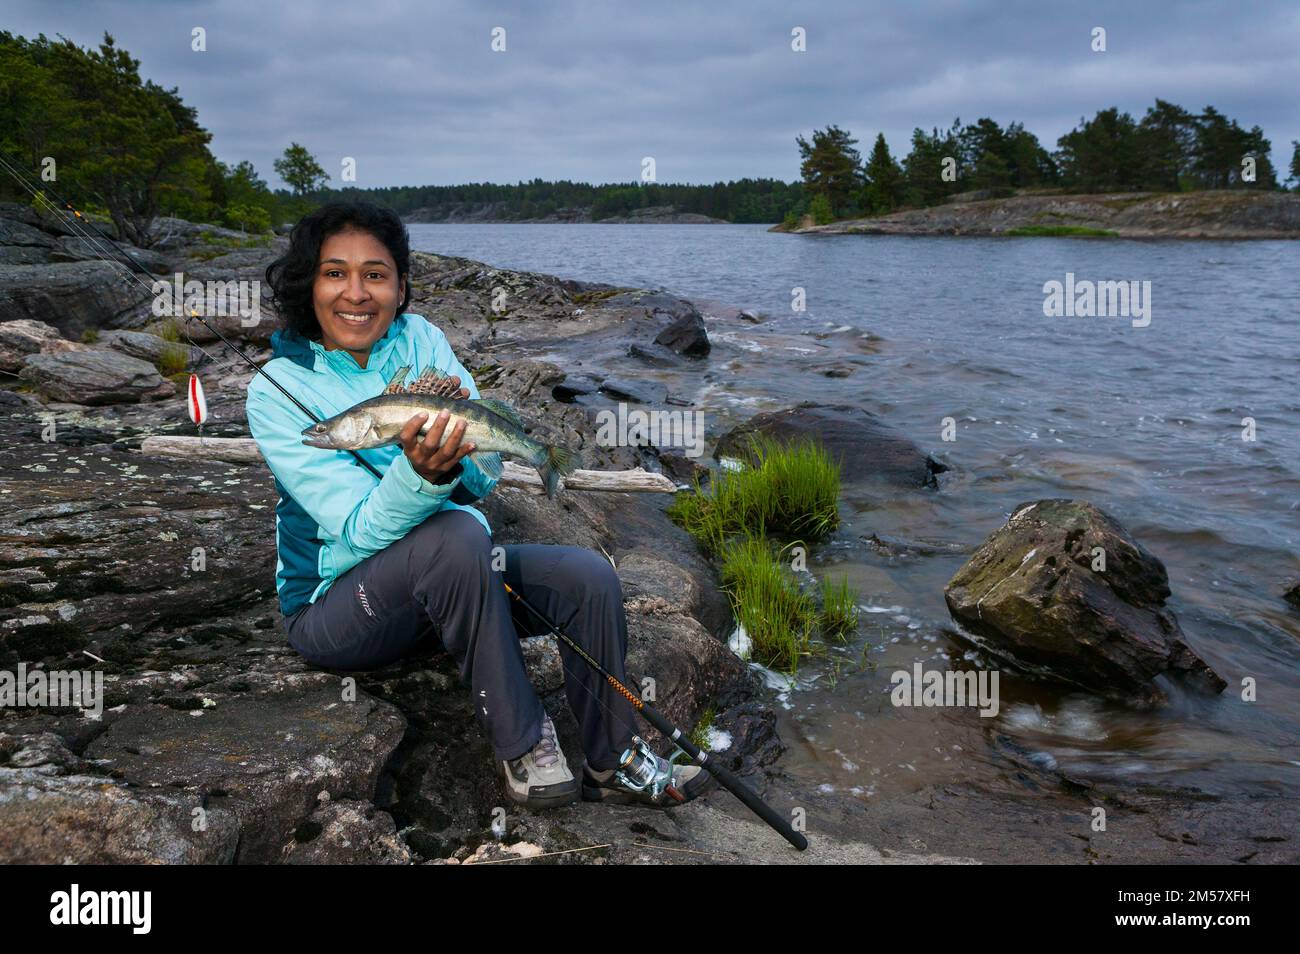 Girl with a Zander, Sander lucioperca, at the island Gudøya in the lake Vansjø, Norway. Vansjø is a part of the water system called Morsavassdraget. Stock Photo